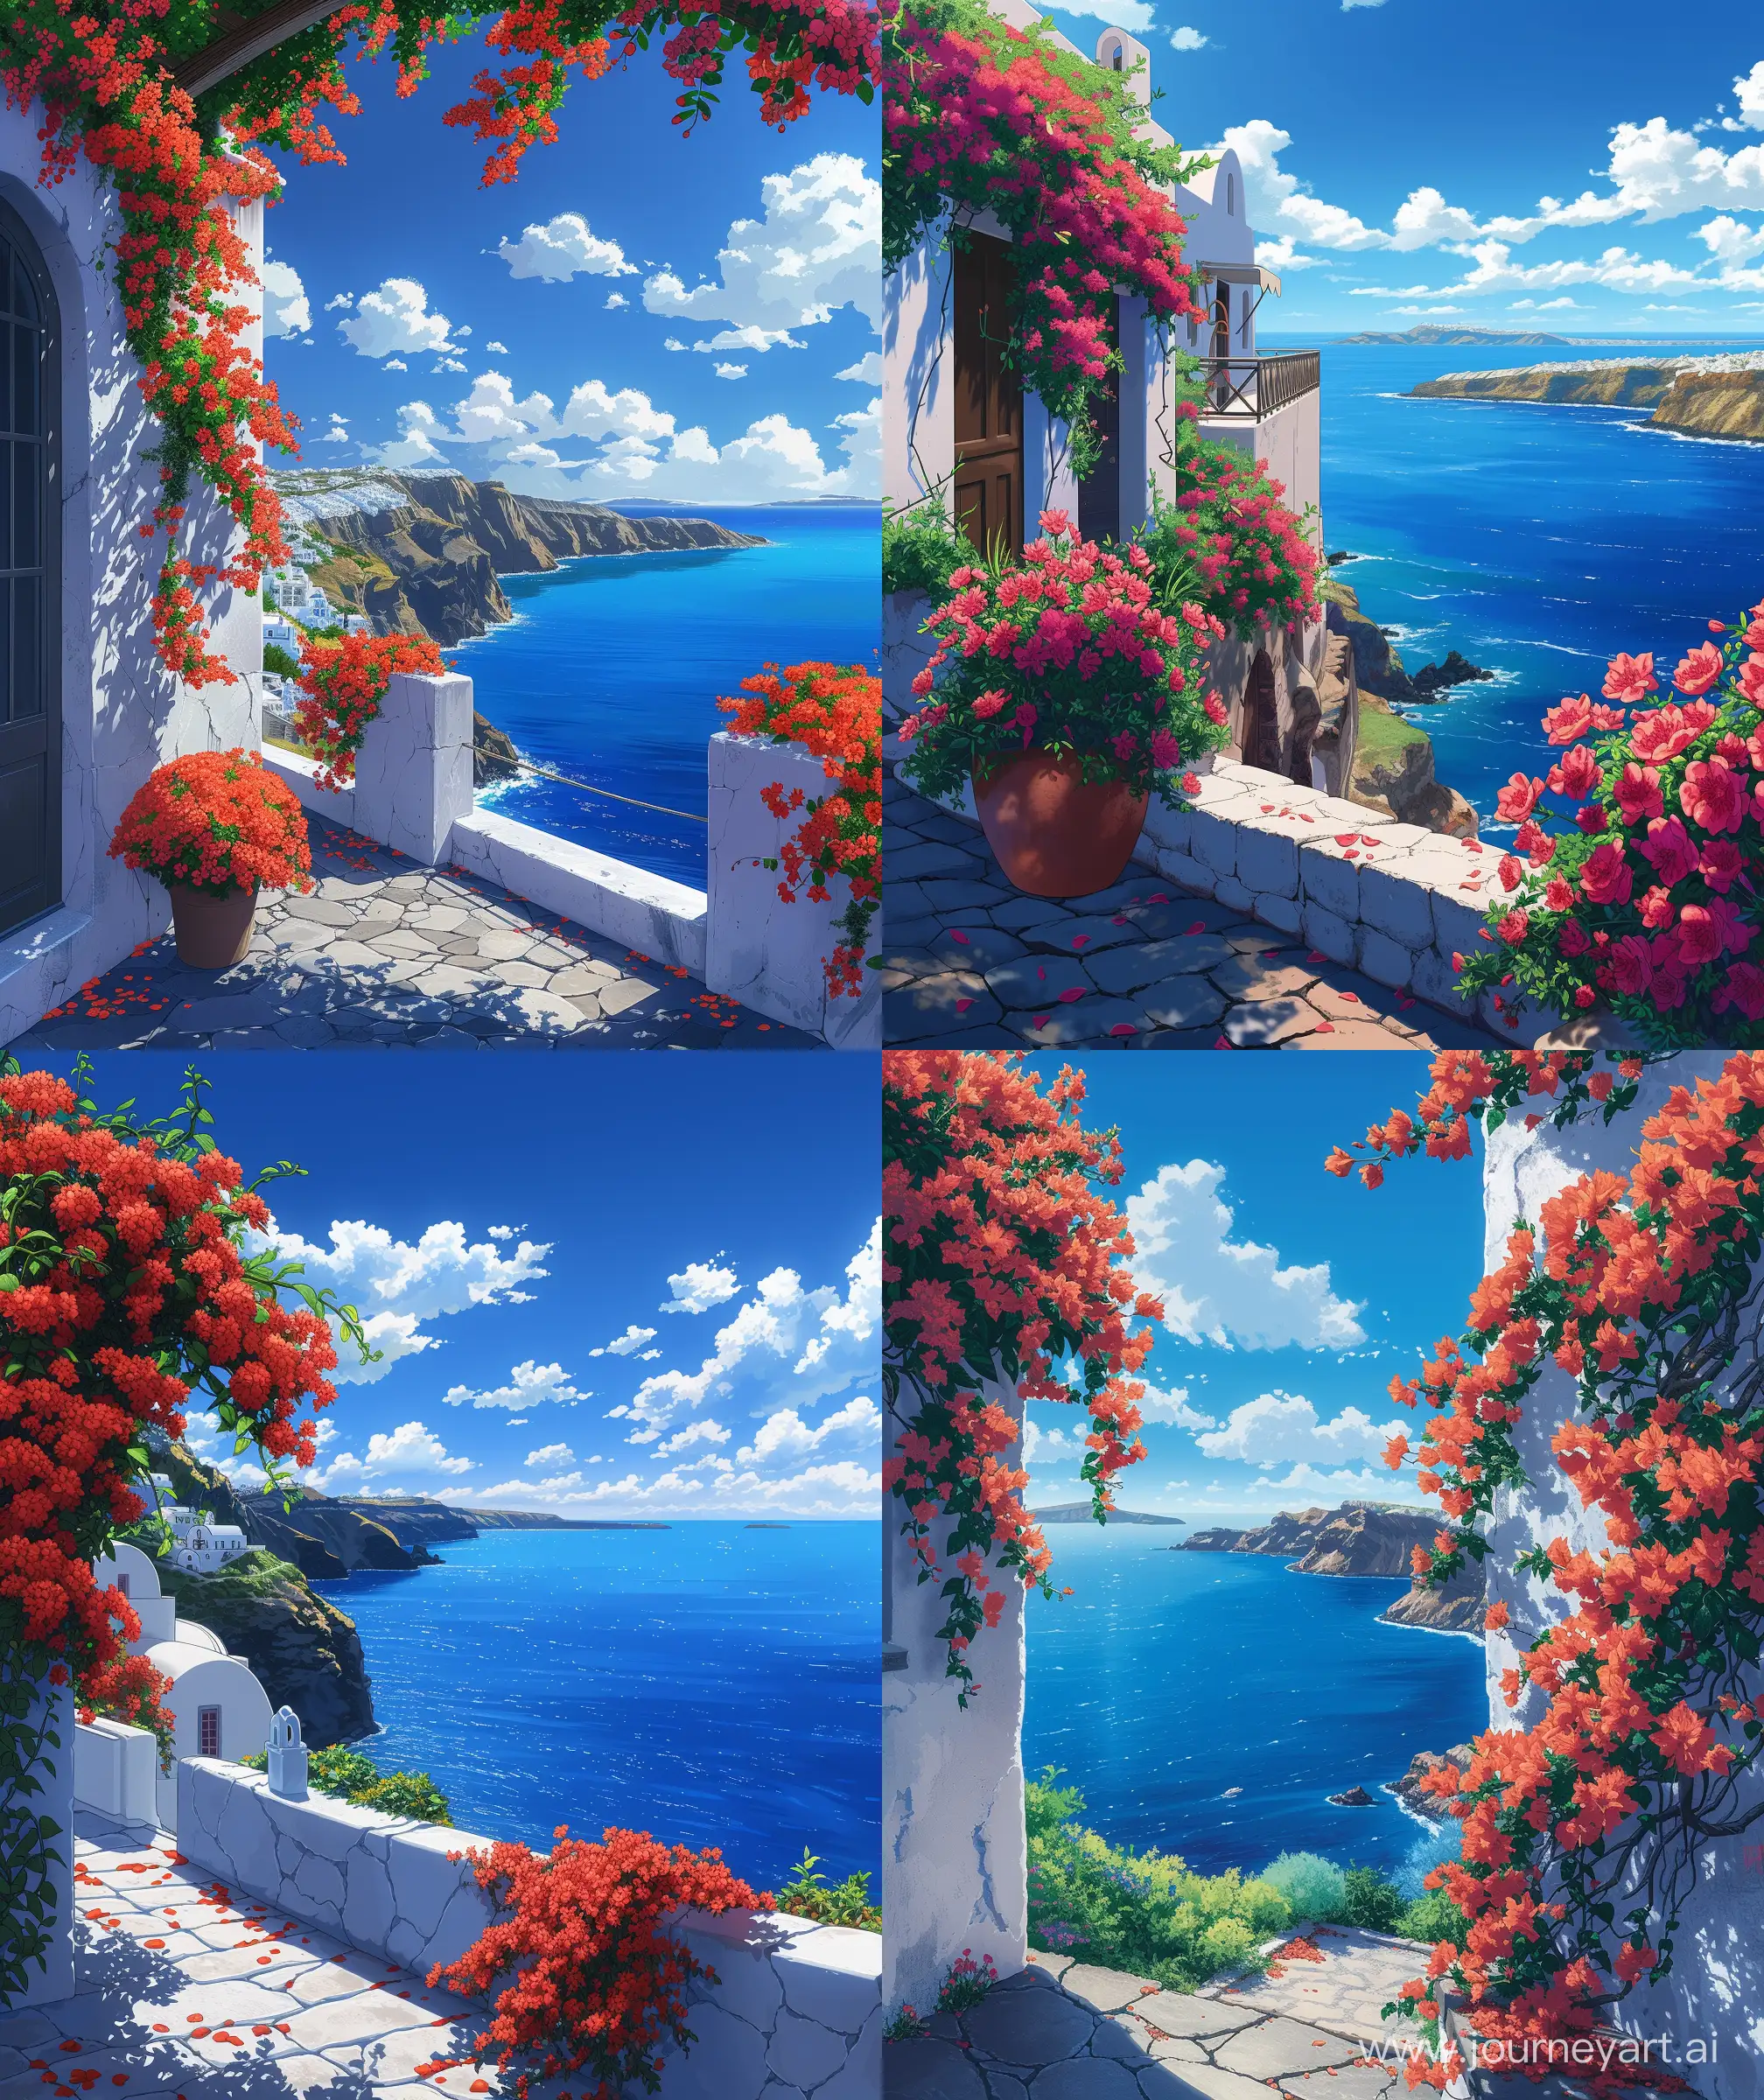 Bougainville-Decoration-Home-Serene-Anime-Scenery-of-Santorini-with-Vibrant-Flower-Decor-and-Vast-Blue-Ocean-View